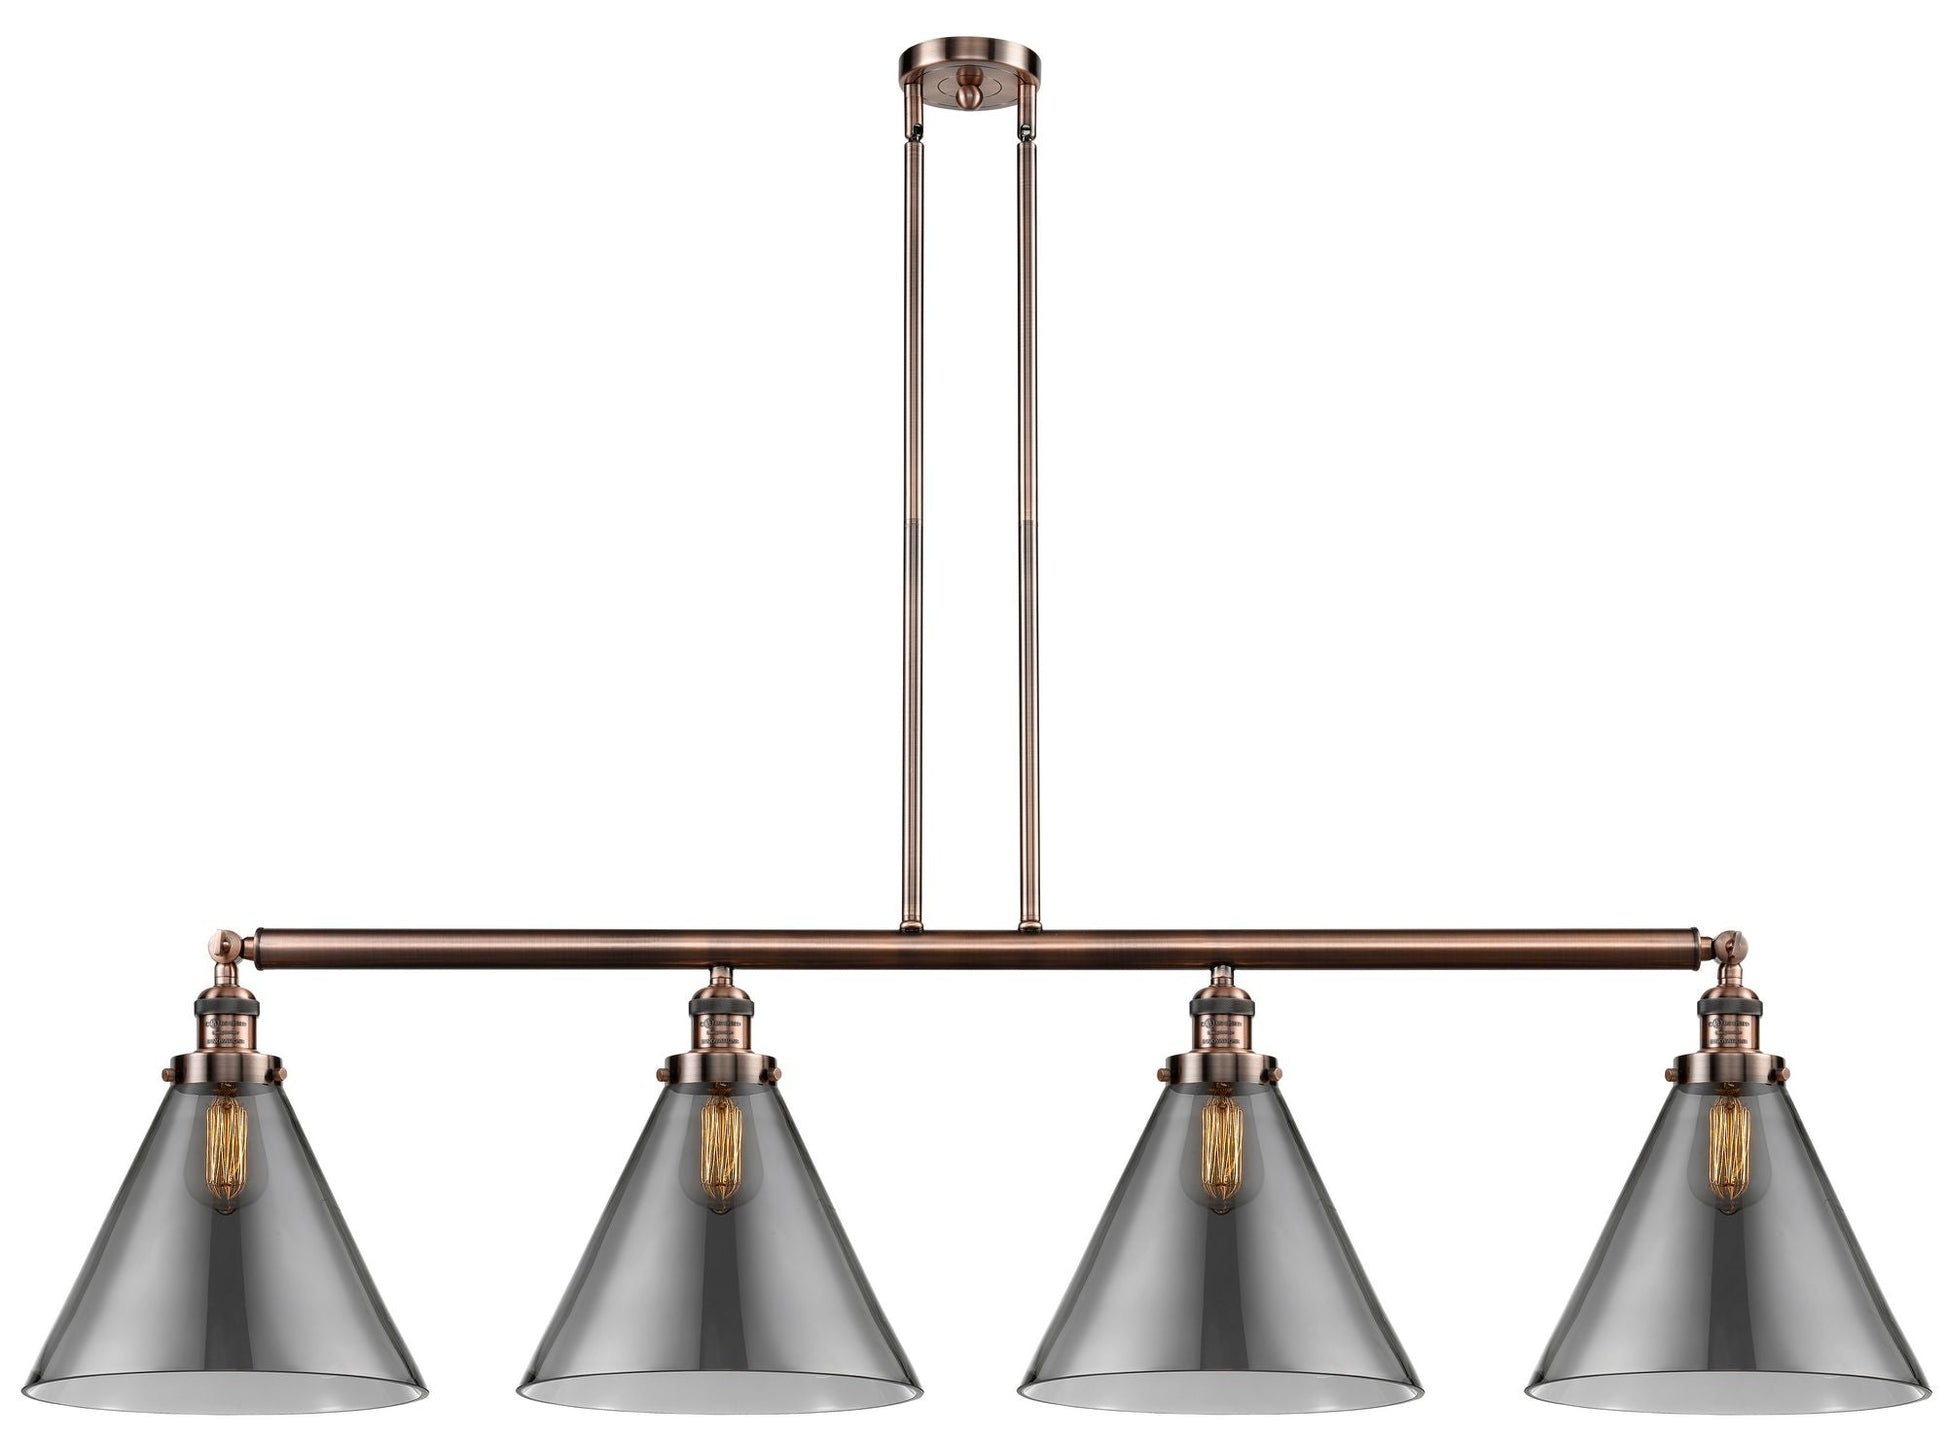 214-AC-G43-L 4-Light 56" Antique Copper Island Light - Plated Smoke Cone 12" Glass - LED Bulb - Dimmensions: 56 x 12 x 14<br>Minimum Height : 24.25<br>Maximum Height : 48.25 - Sloped Ceiling Compatible: Yes